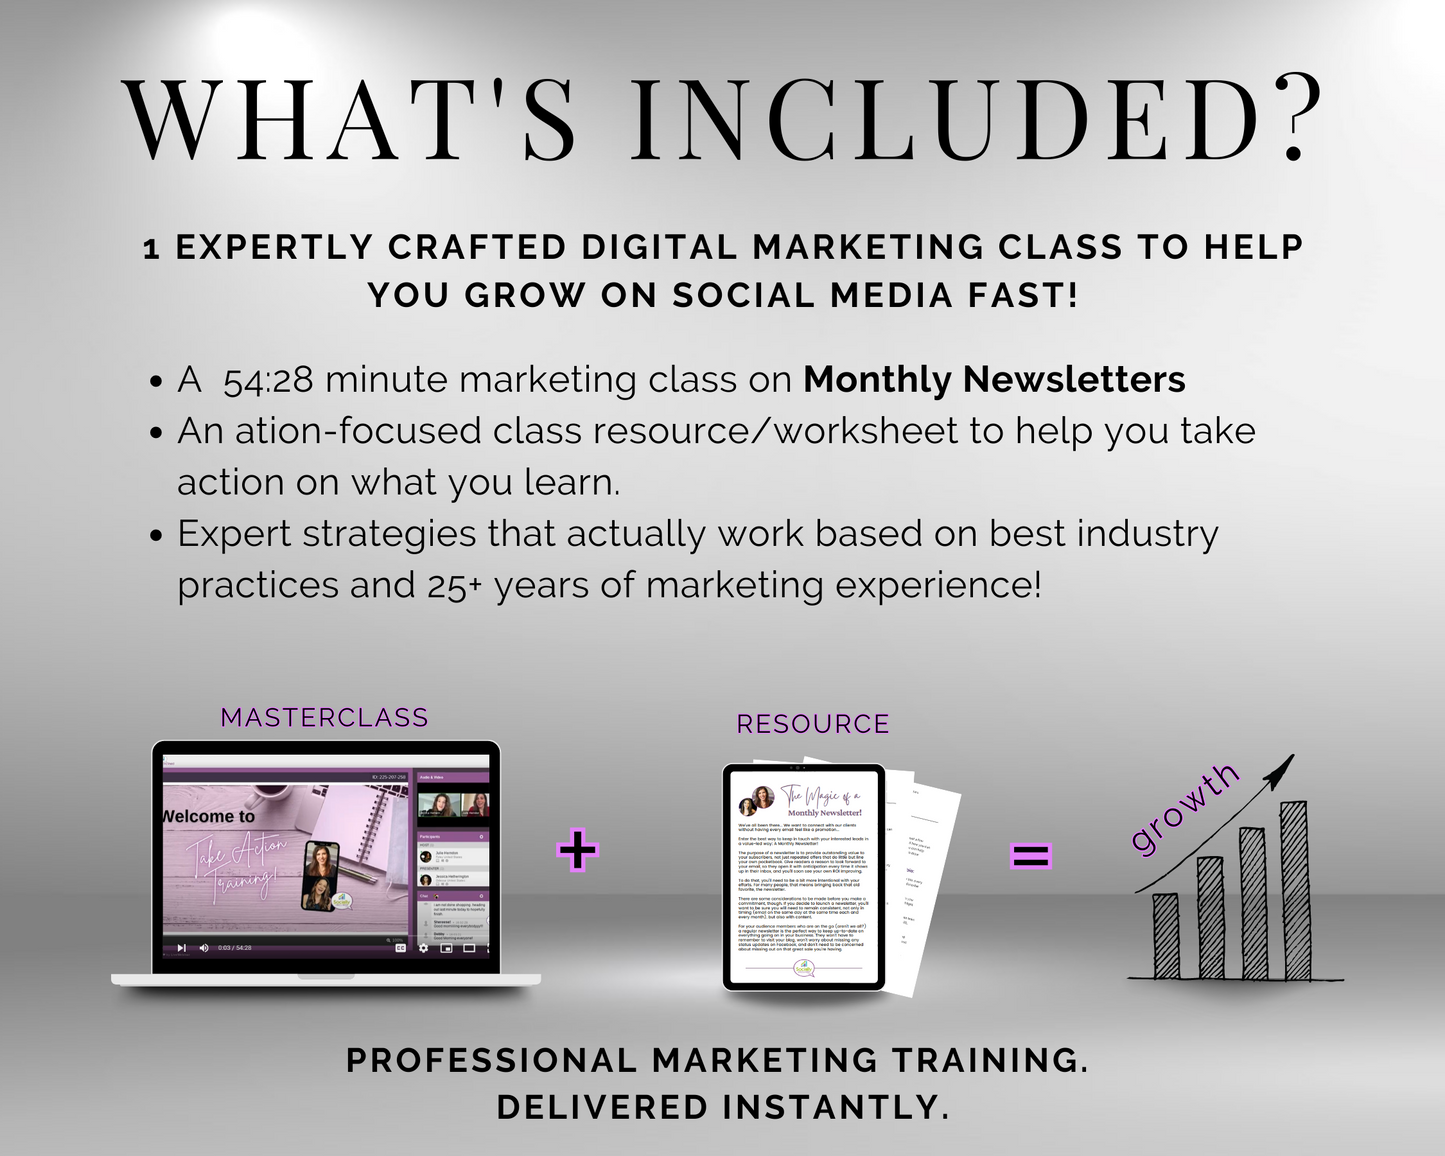 What's included in the Get Socially Inclined Take Action Series - Monthly Newsletters Masterclass digital marketing class?